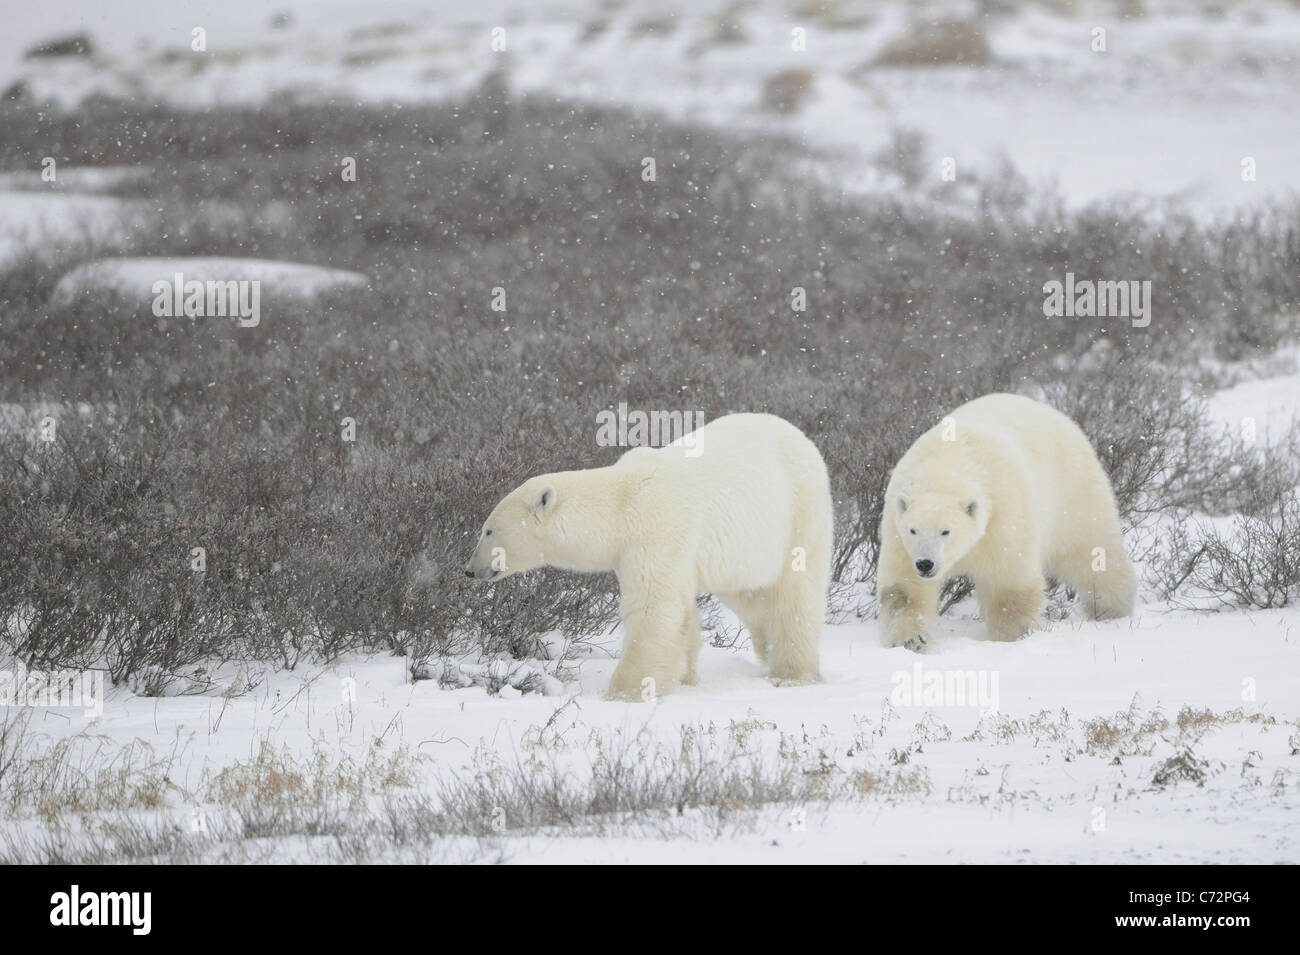 Two polar bears. Two polar bears go on snow-covered tundra one after another.It is snowing. Stock Photo